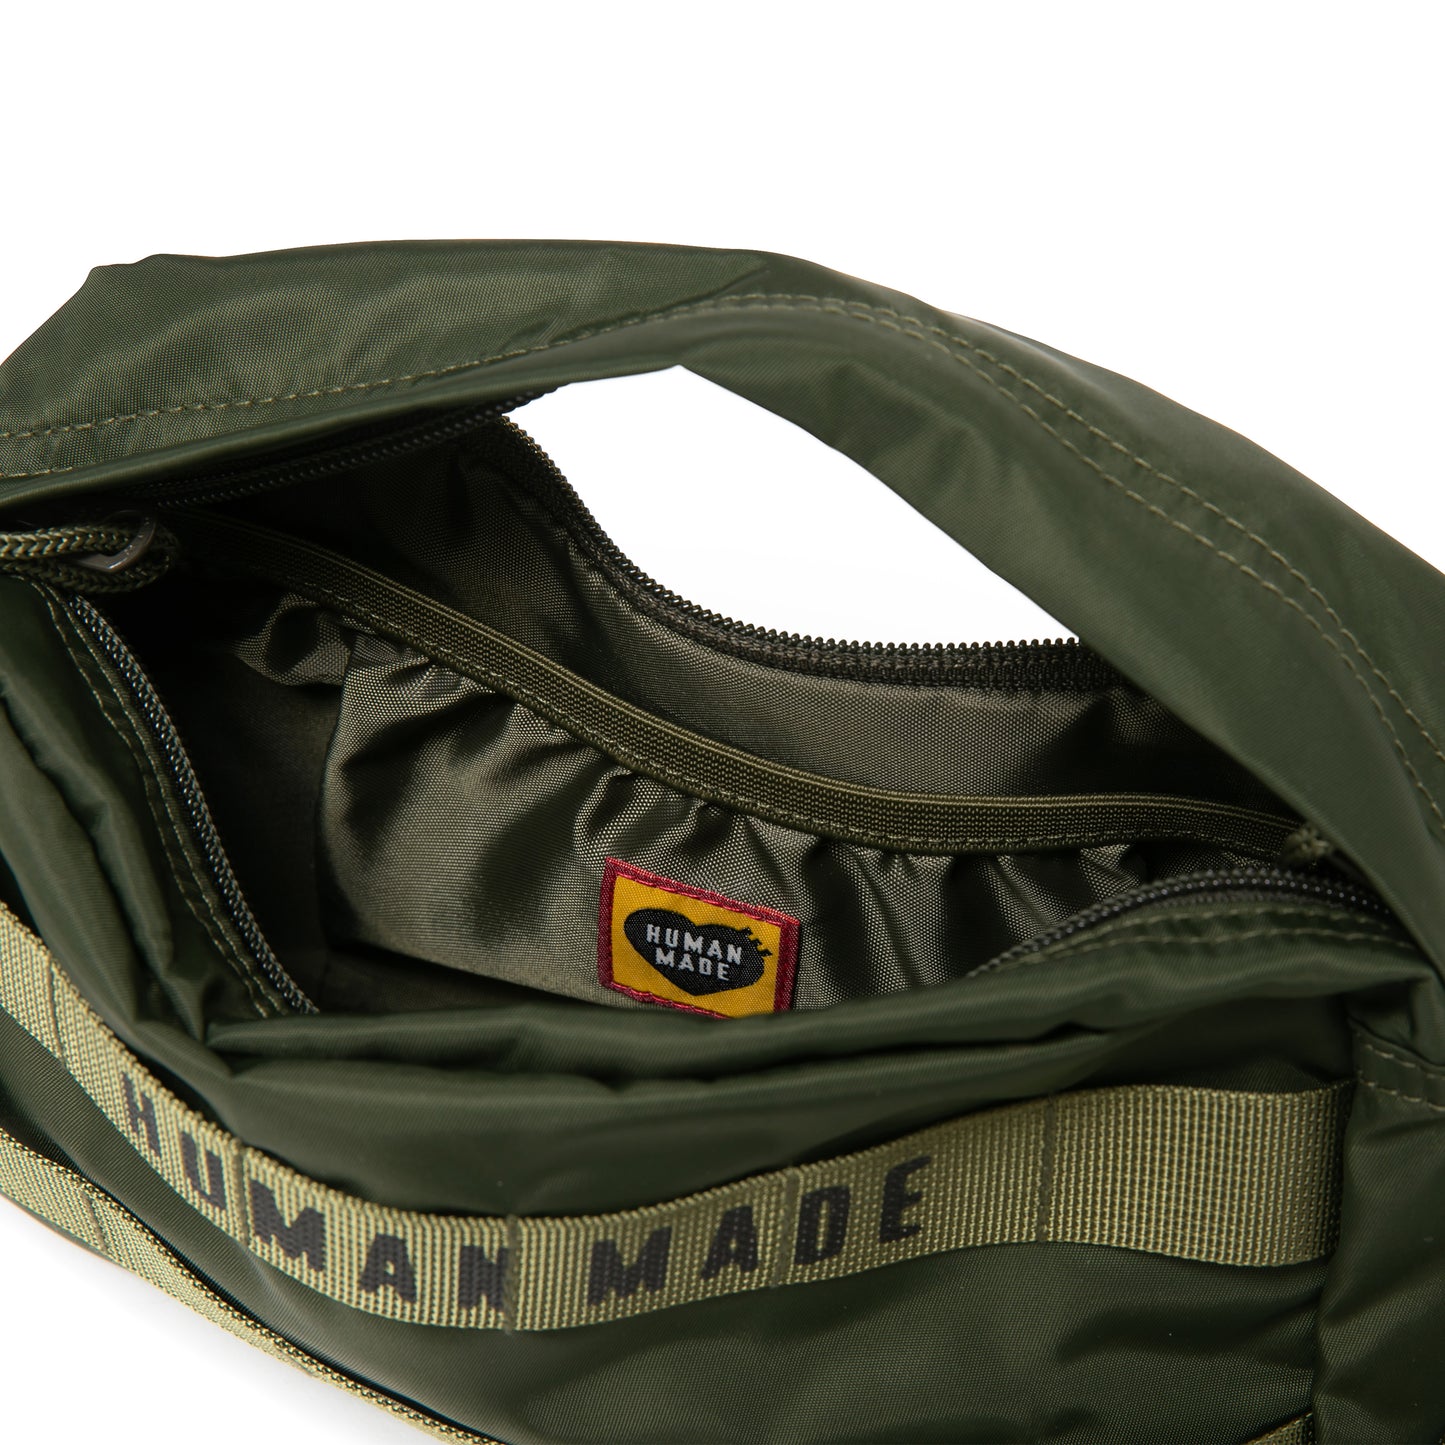 human made military pouch #1 (oliv)